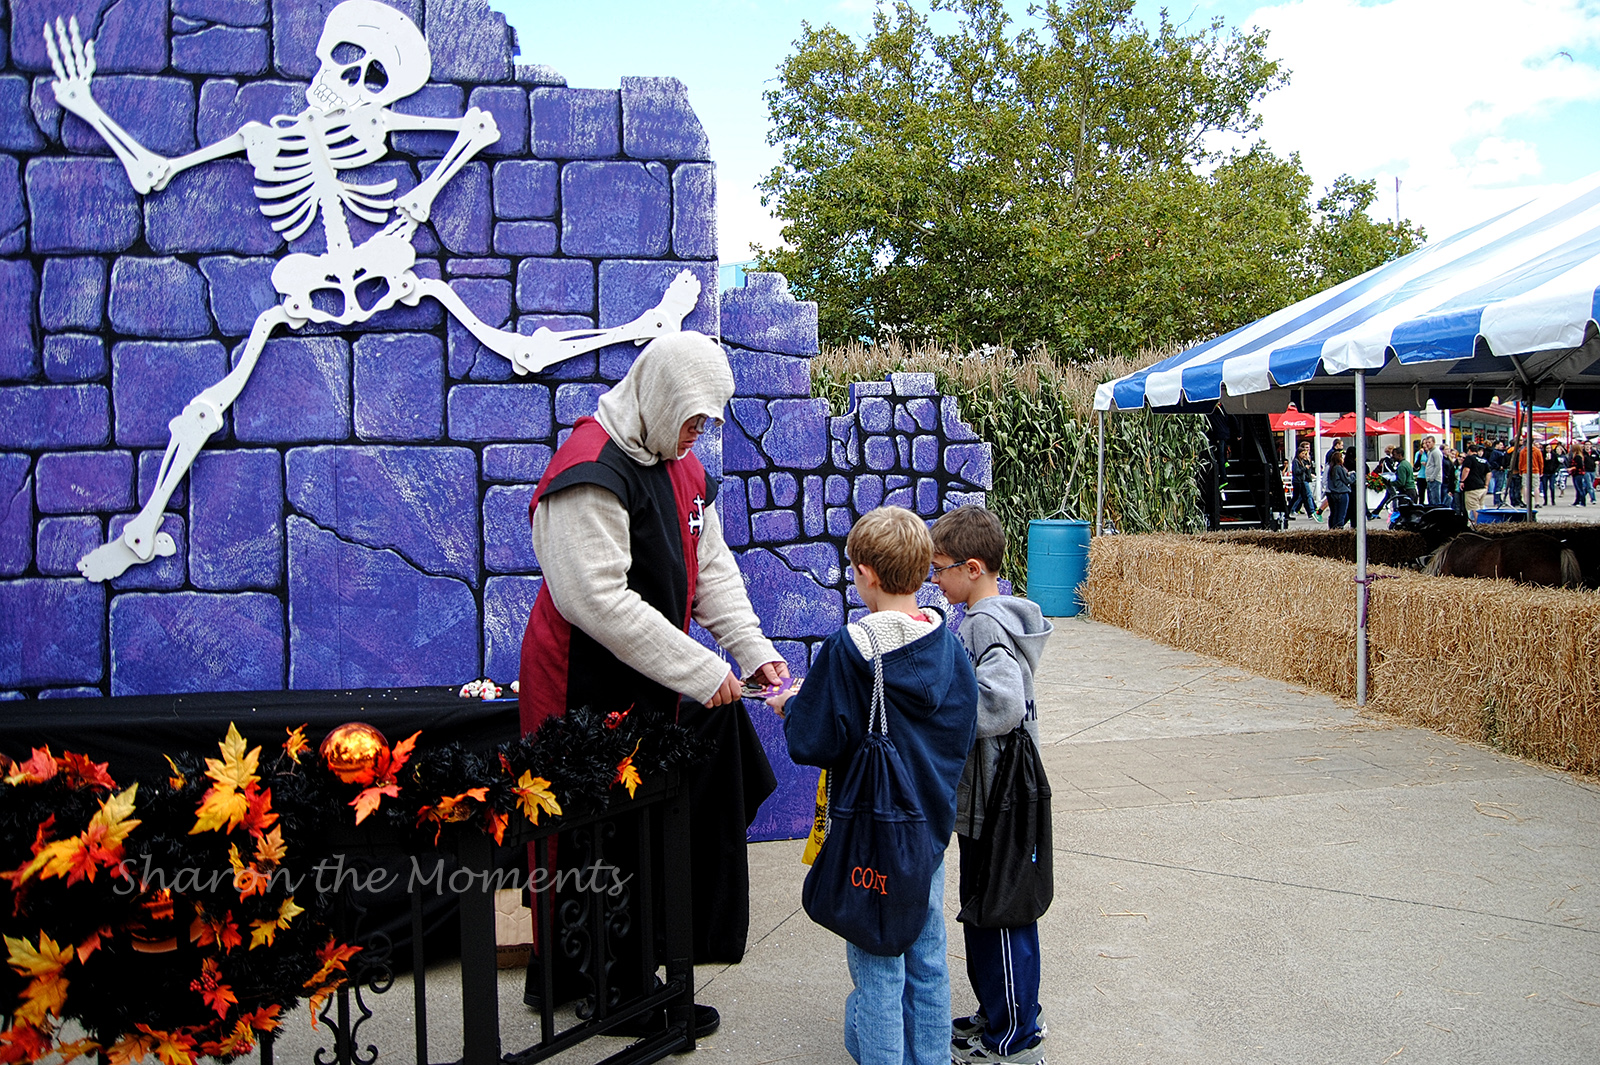 Fright or Fear or Family Fun... Last HalloWeekend at Cedar Point!|Sharon the Moments Blog 